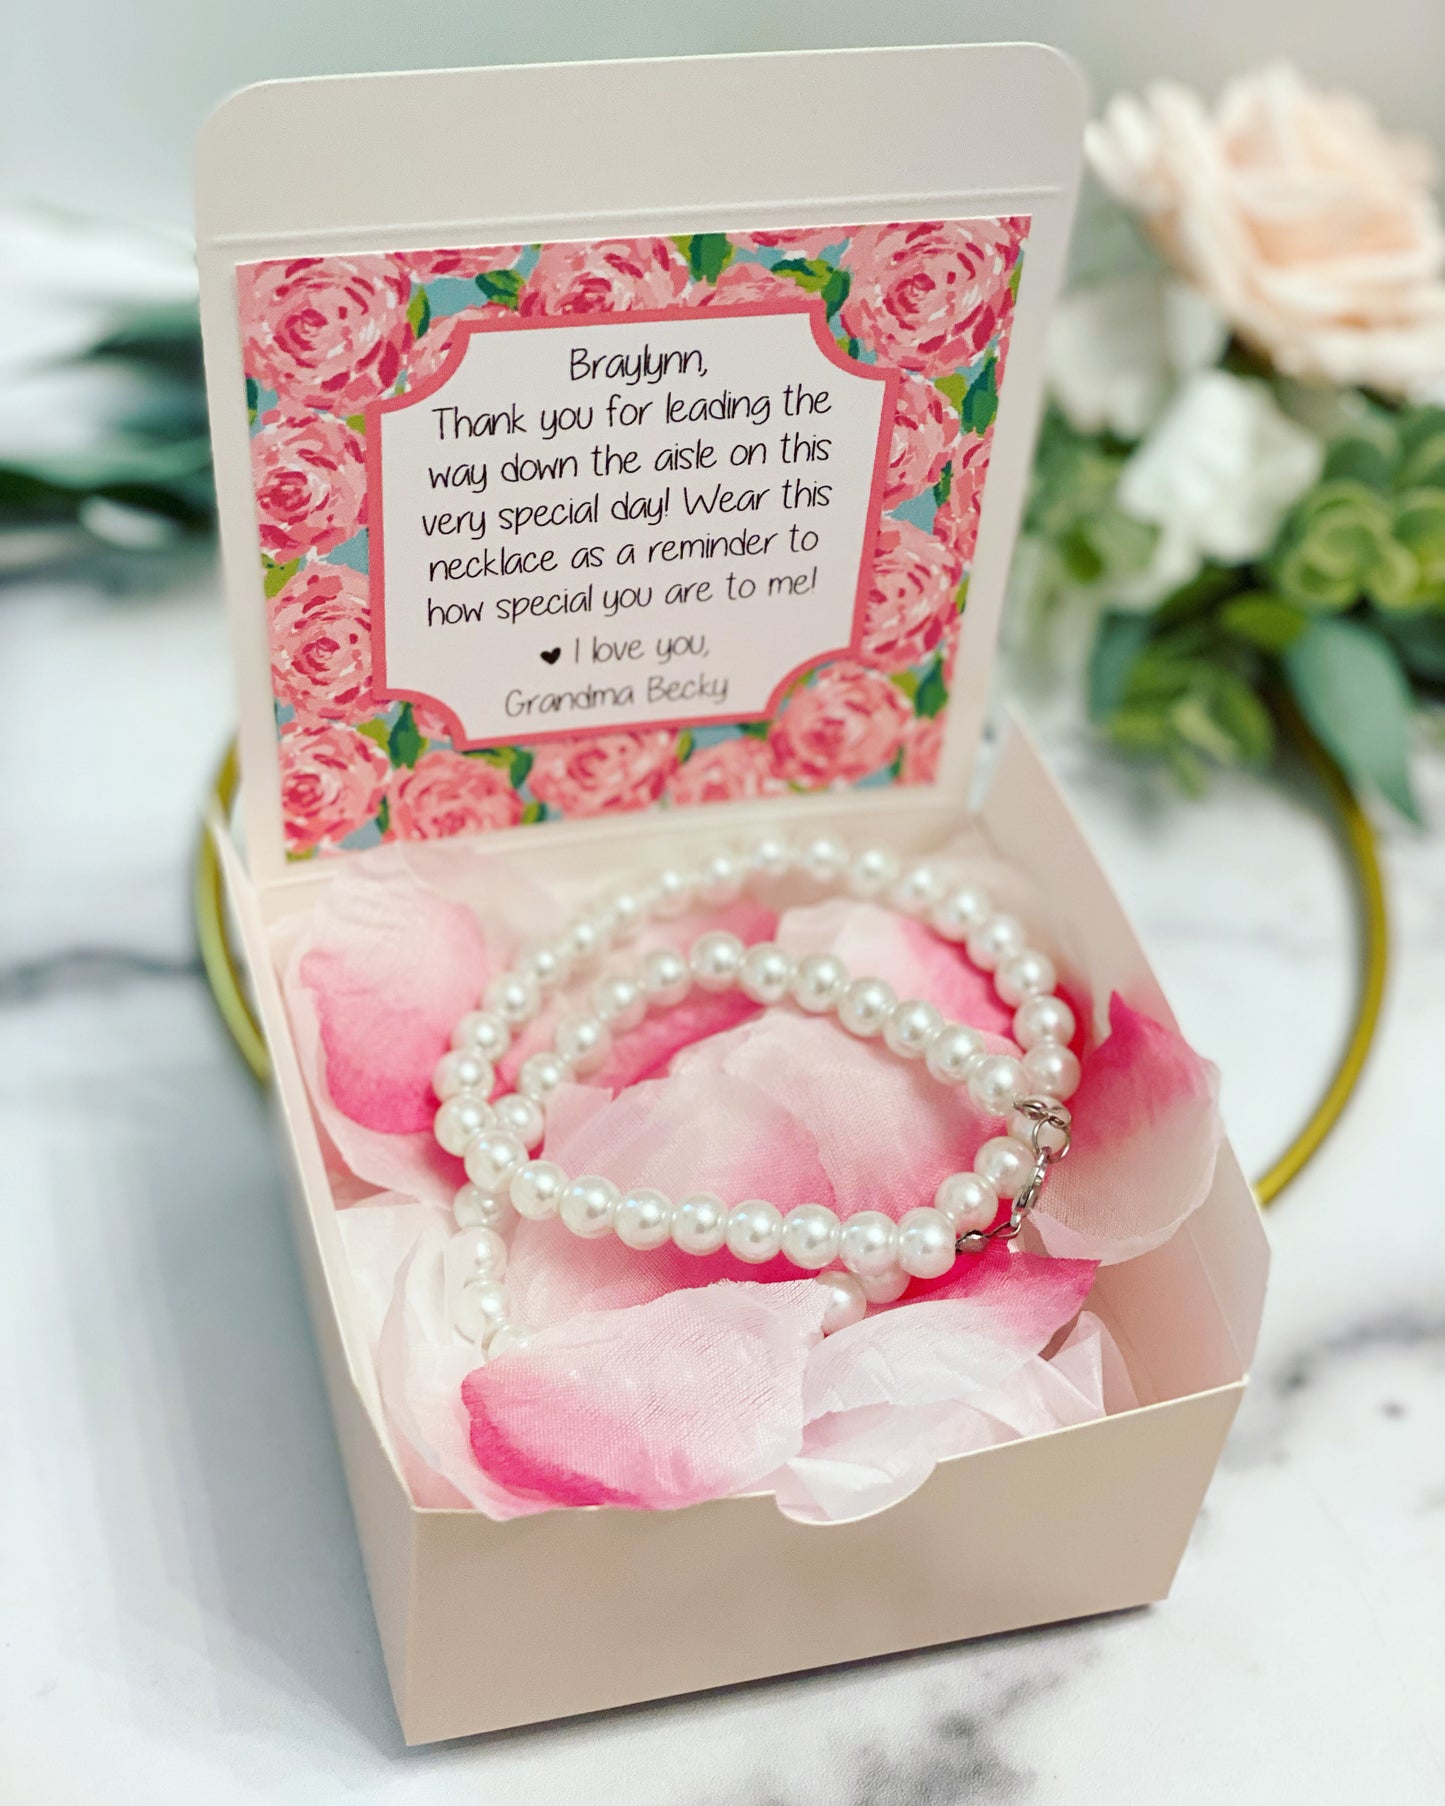 Flower Girl Pearl Necklace & Practice Flower Petals with gift box!